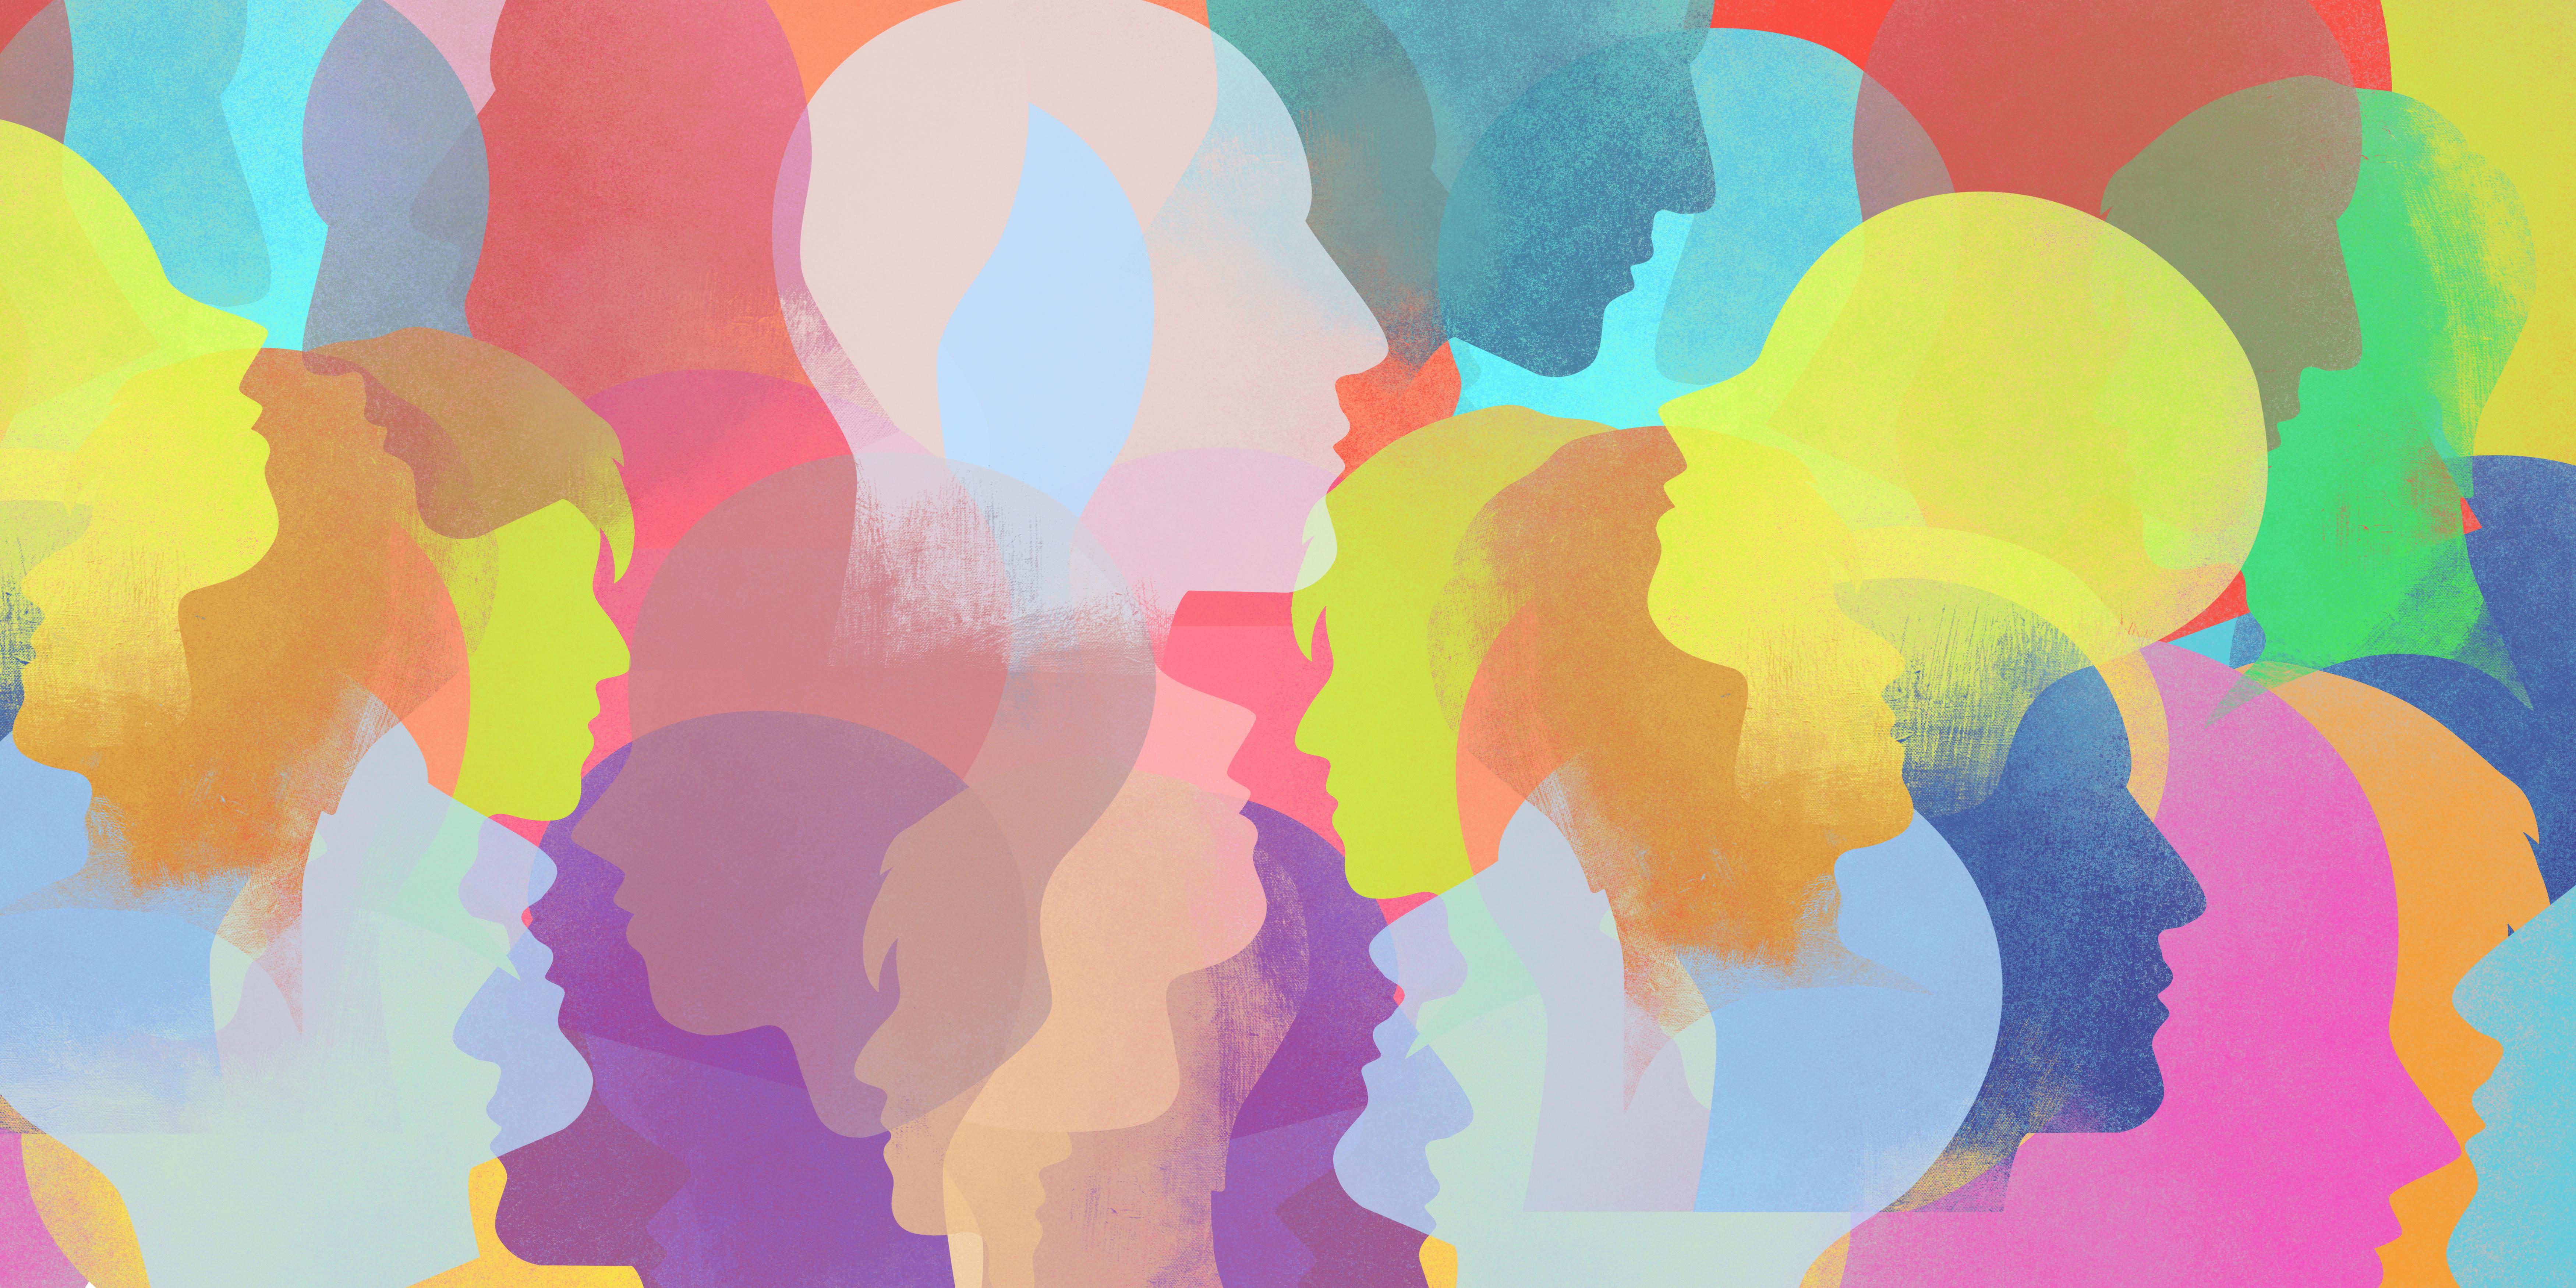 a vector image of colorful silhouettes of people in a crowd